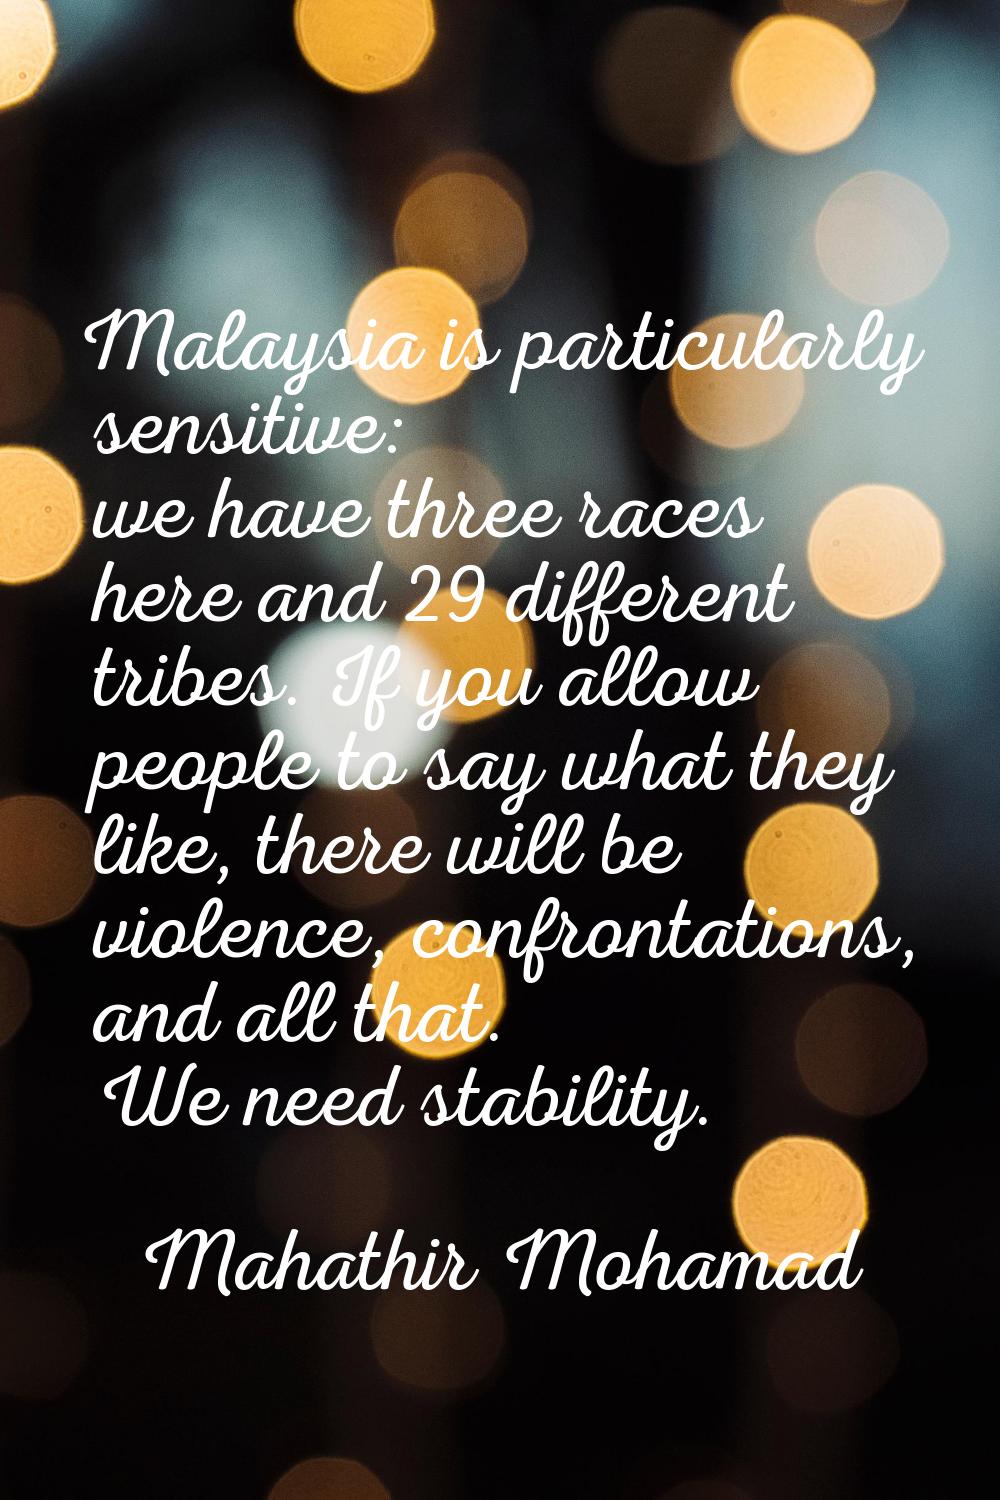 Malaysia is particularly sensitive: we have three races here and 29 different tribes. If you allow 